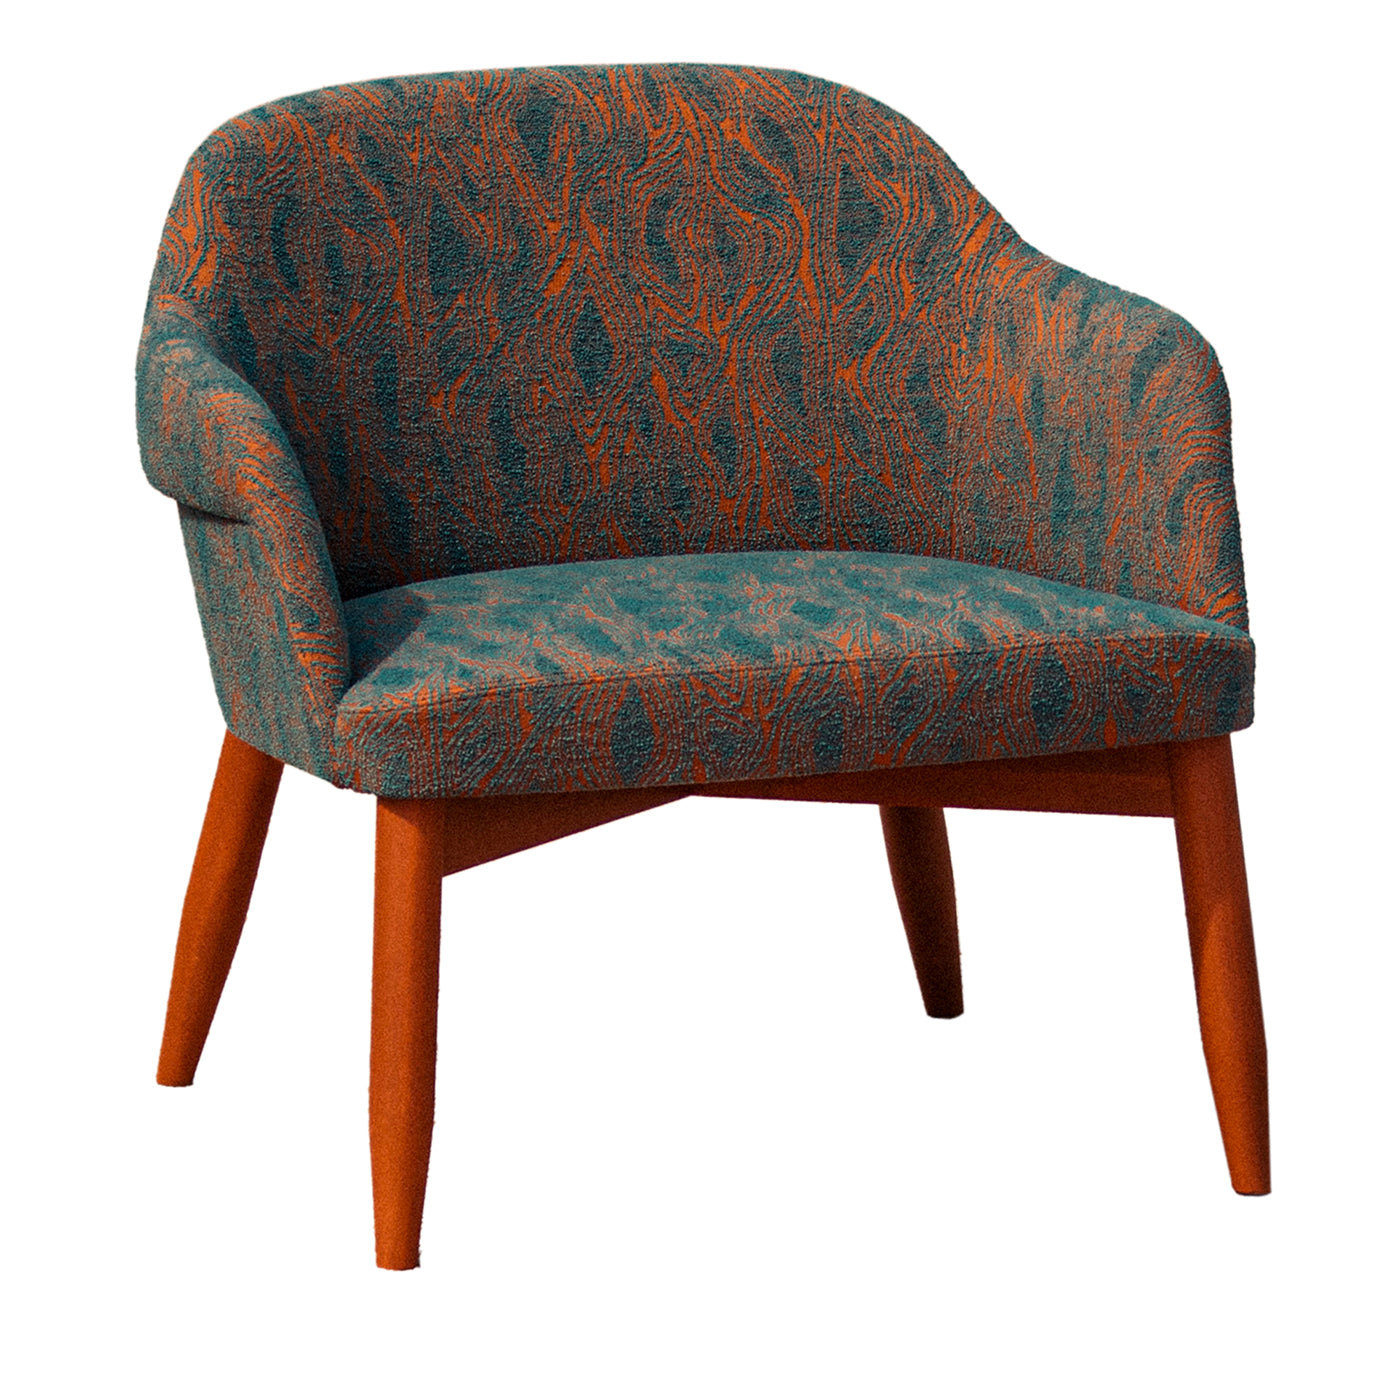 Spy 651 Orange and Teal Armchair by Emilio Nanni - Main view